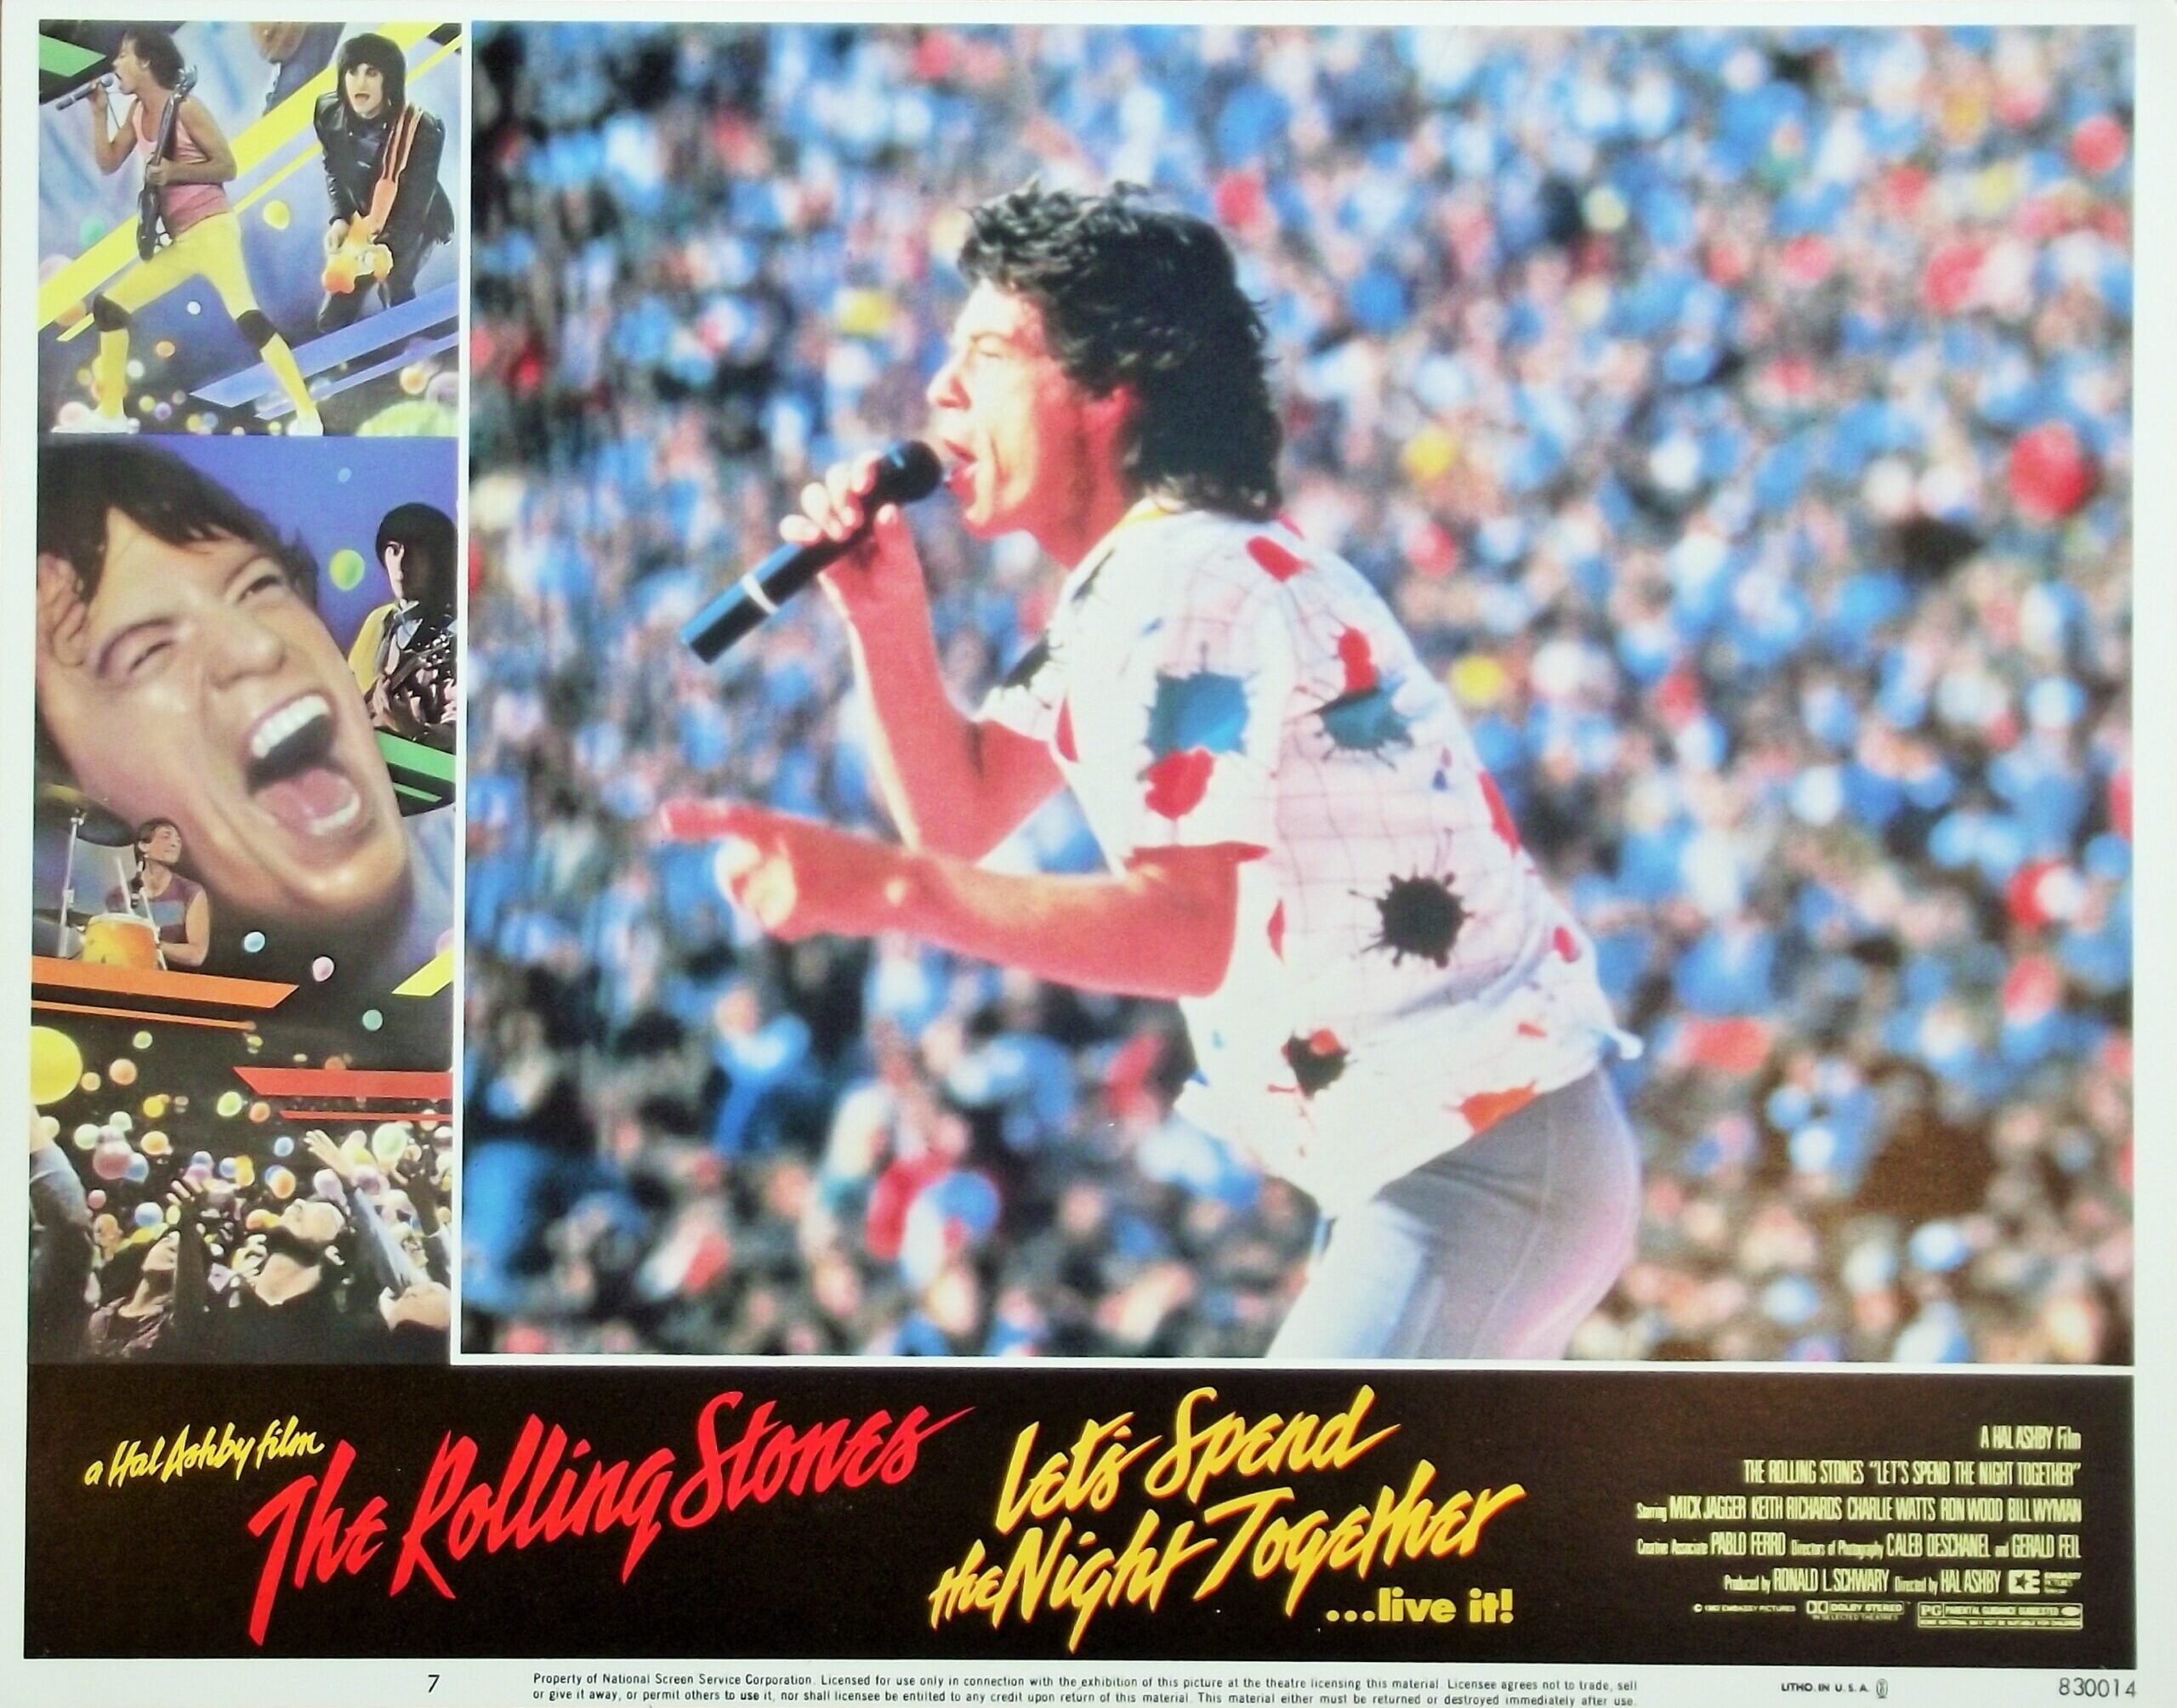 Vintage original US lobby card poster for The Rolling Stones in Let's Spend the Night Together film.